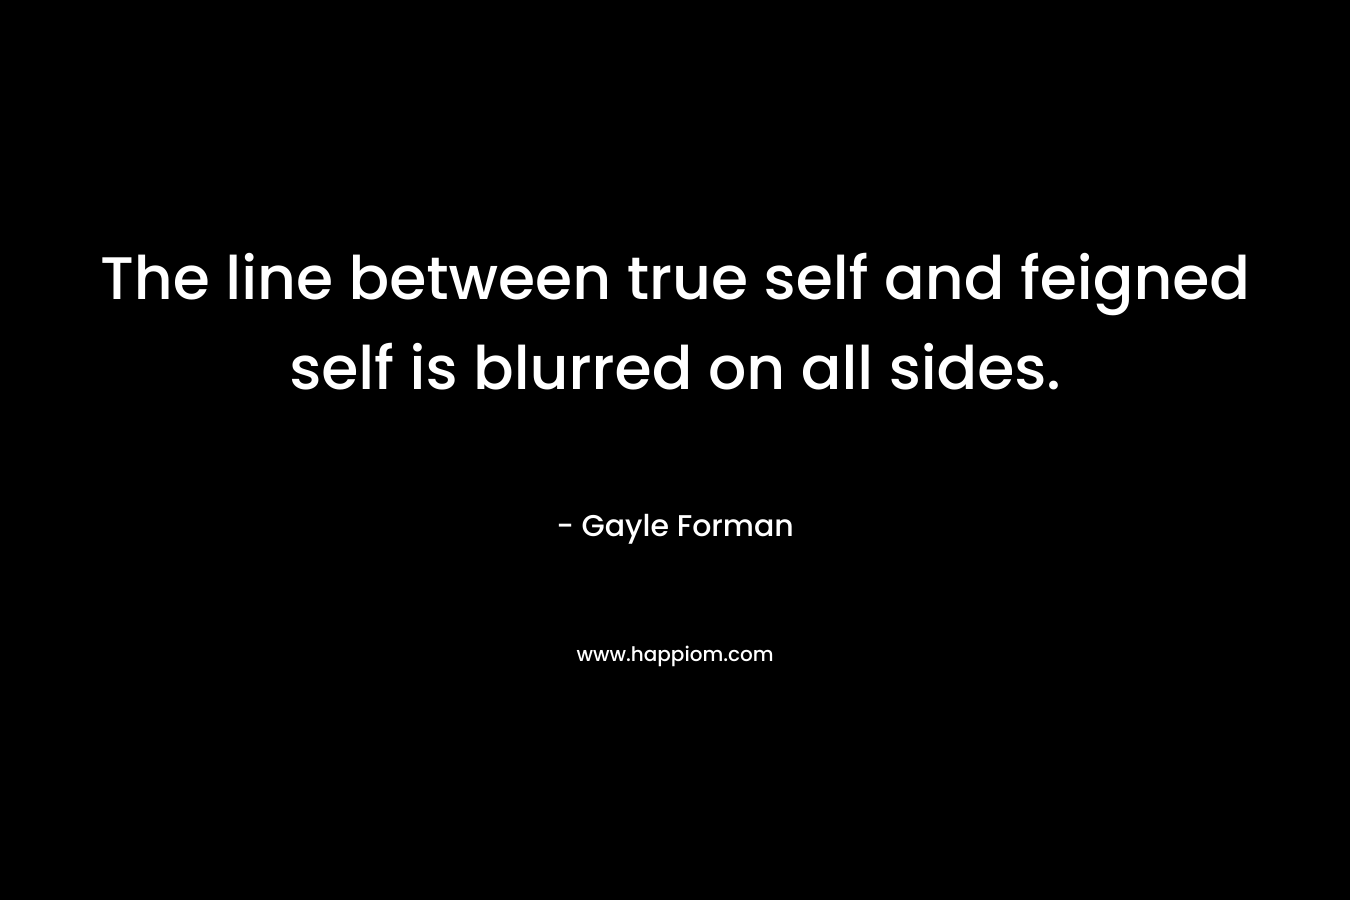 The line between true self and feigned self is blurred on all sides. – Gayle Forman